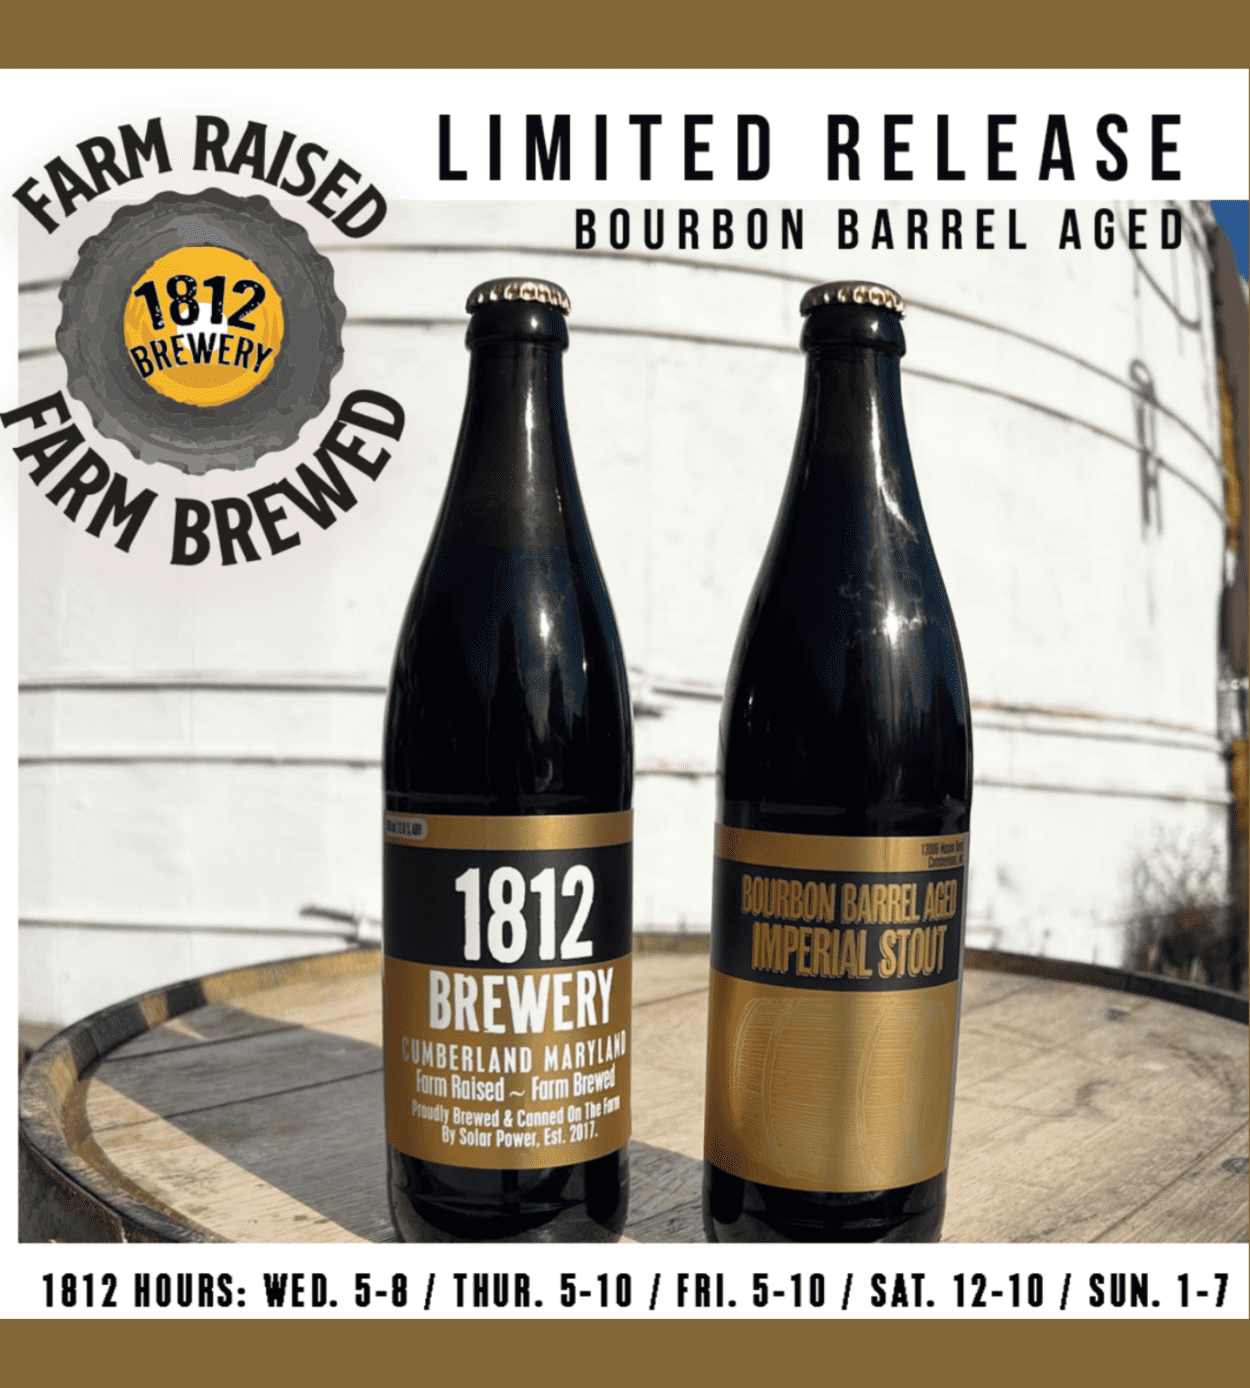 Bourbon Barrel Aged Imperial Stout Limited Release